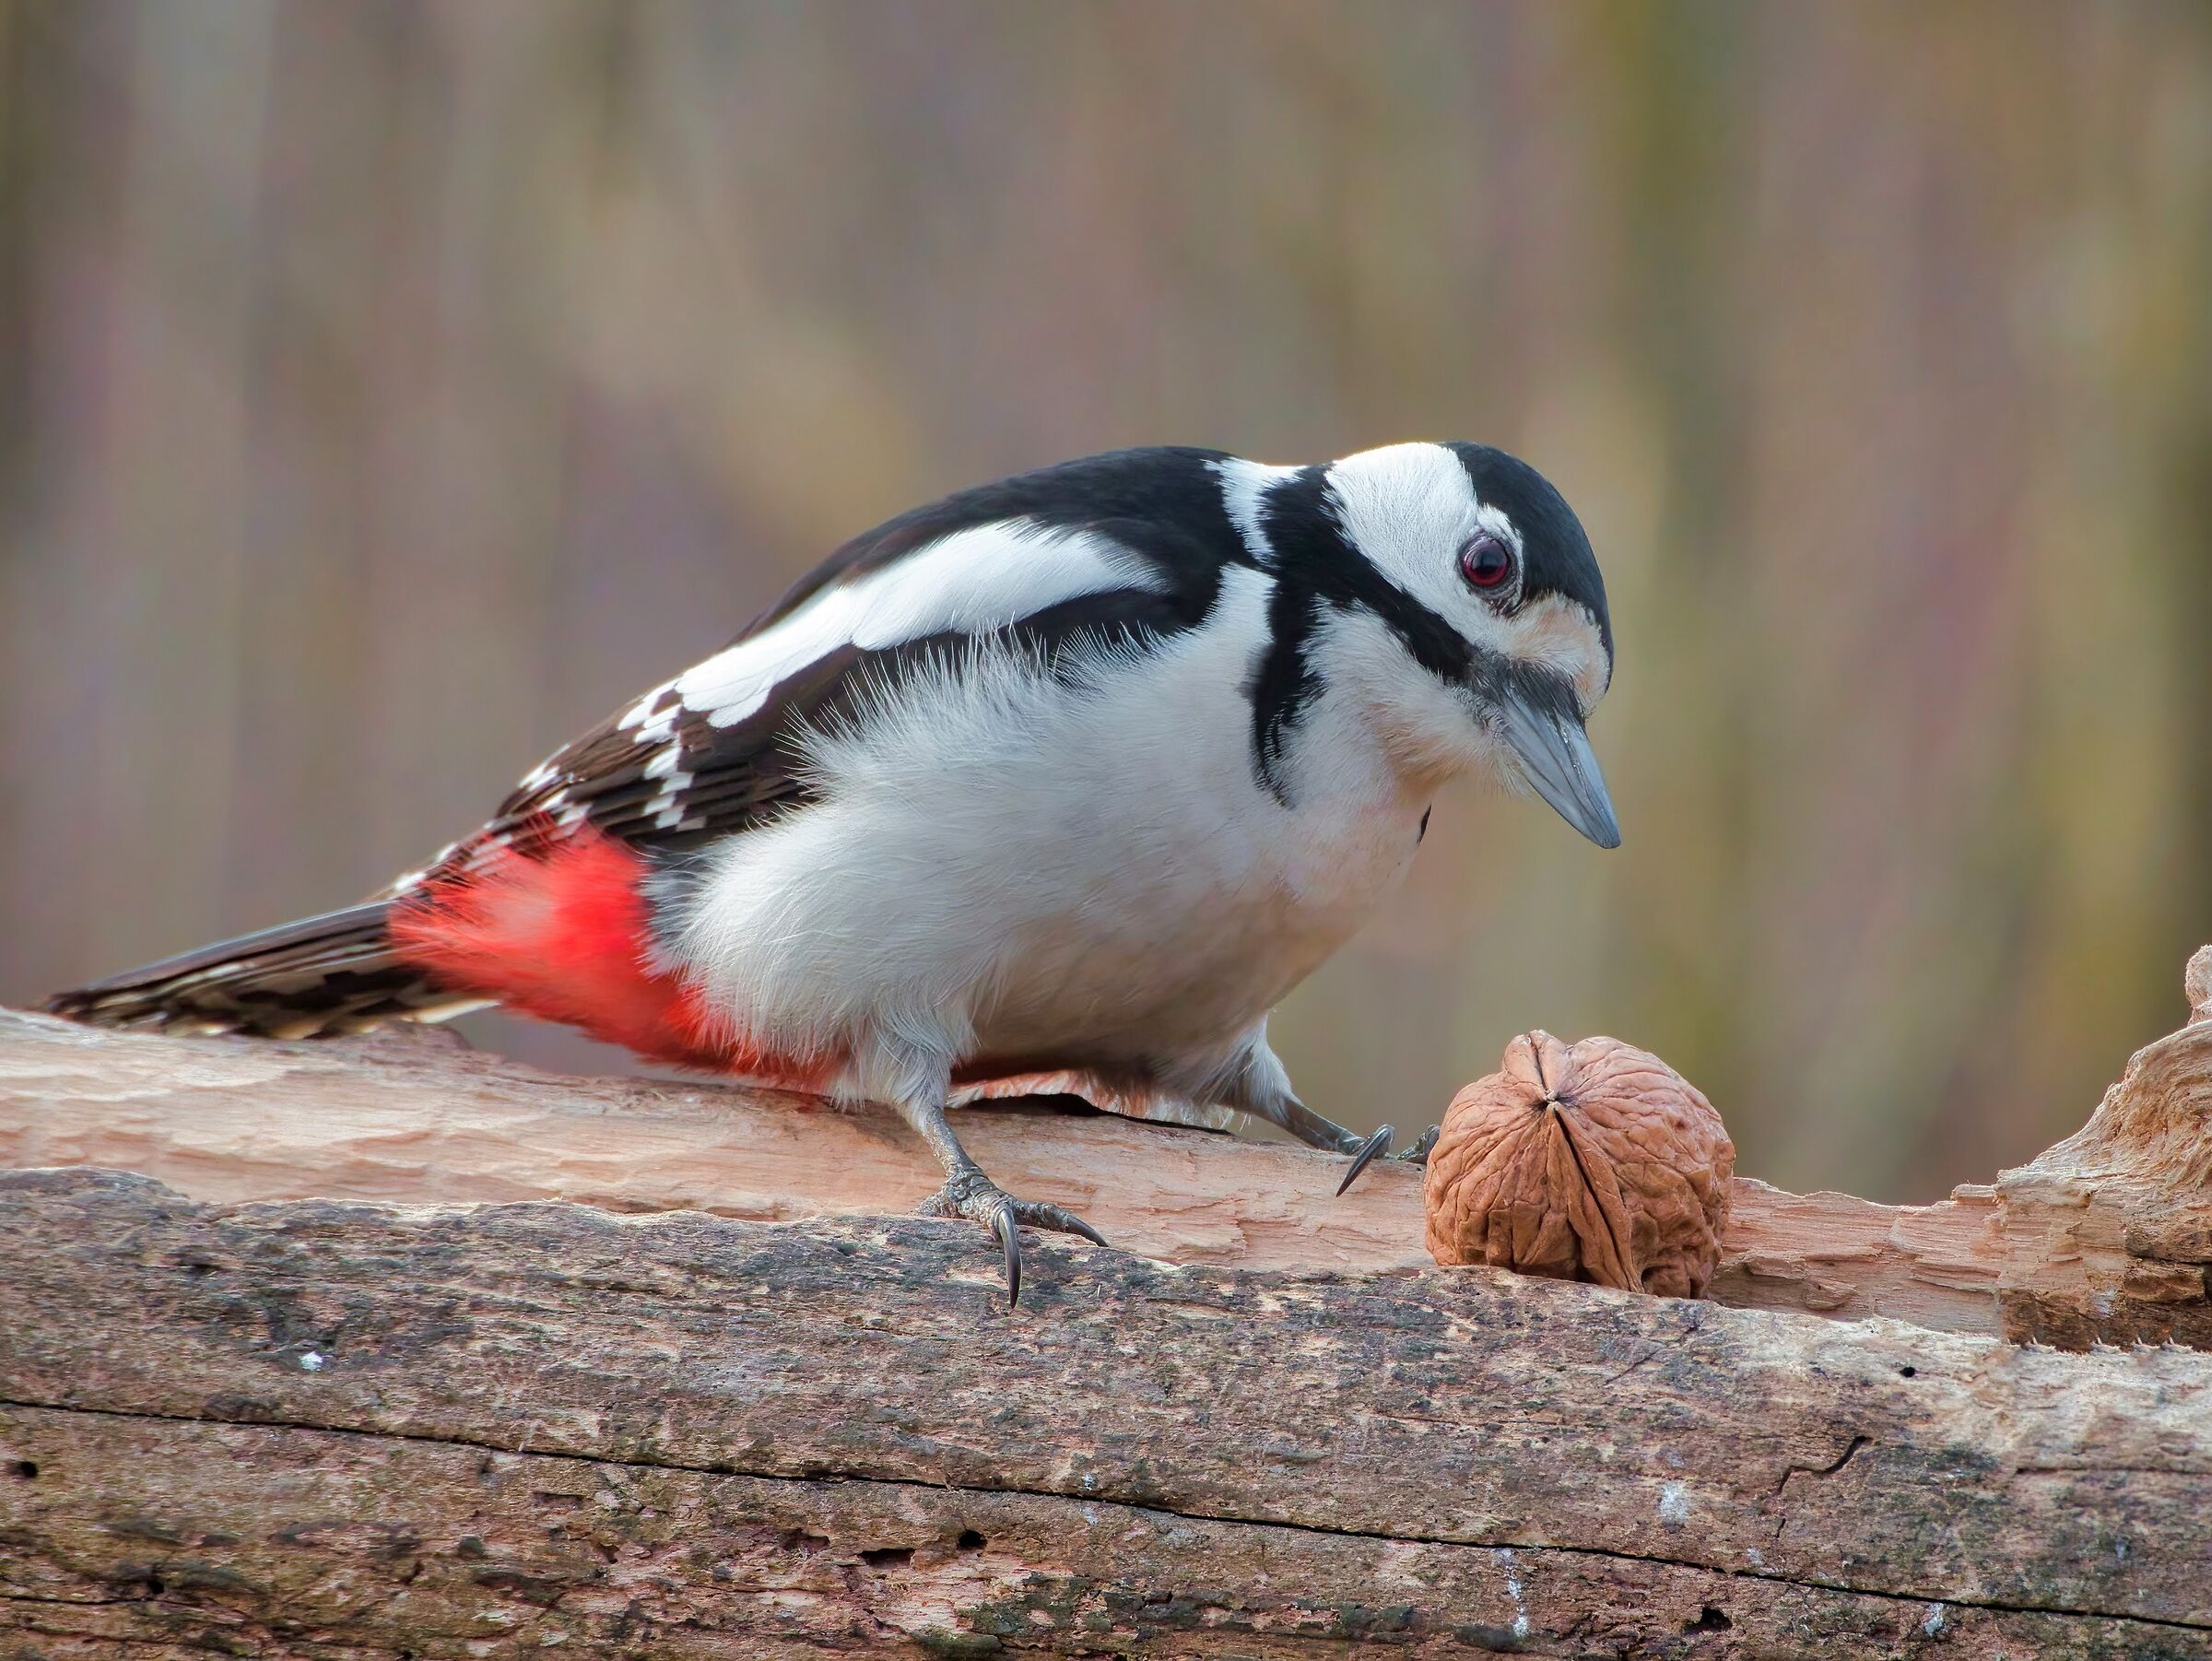 The woodpecker and the walnut...